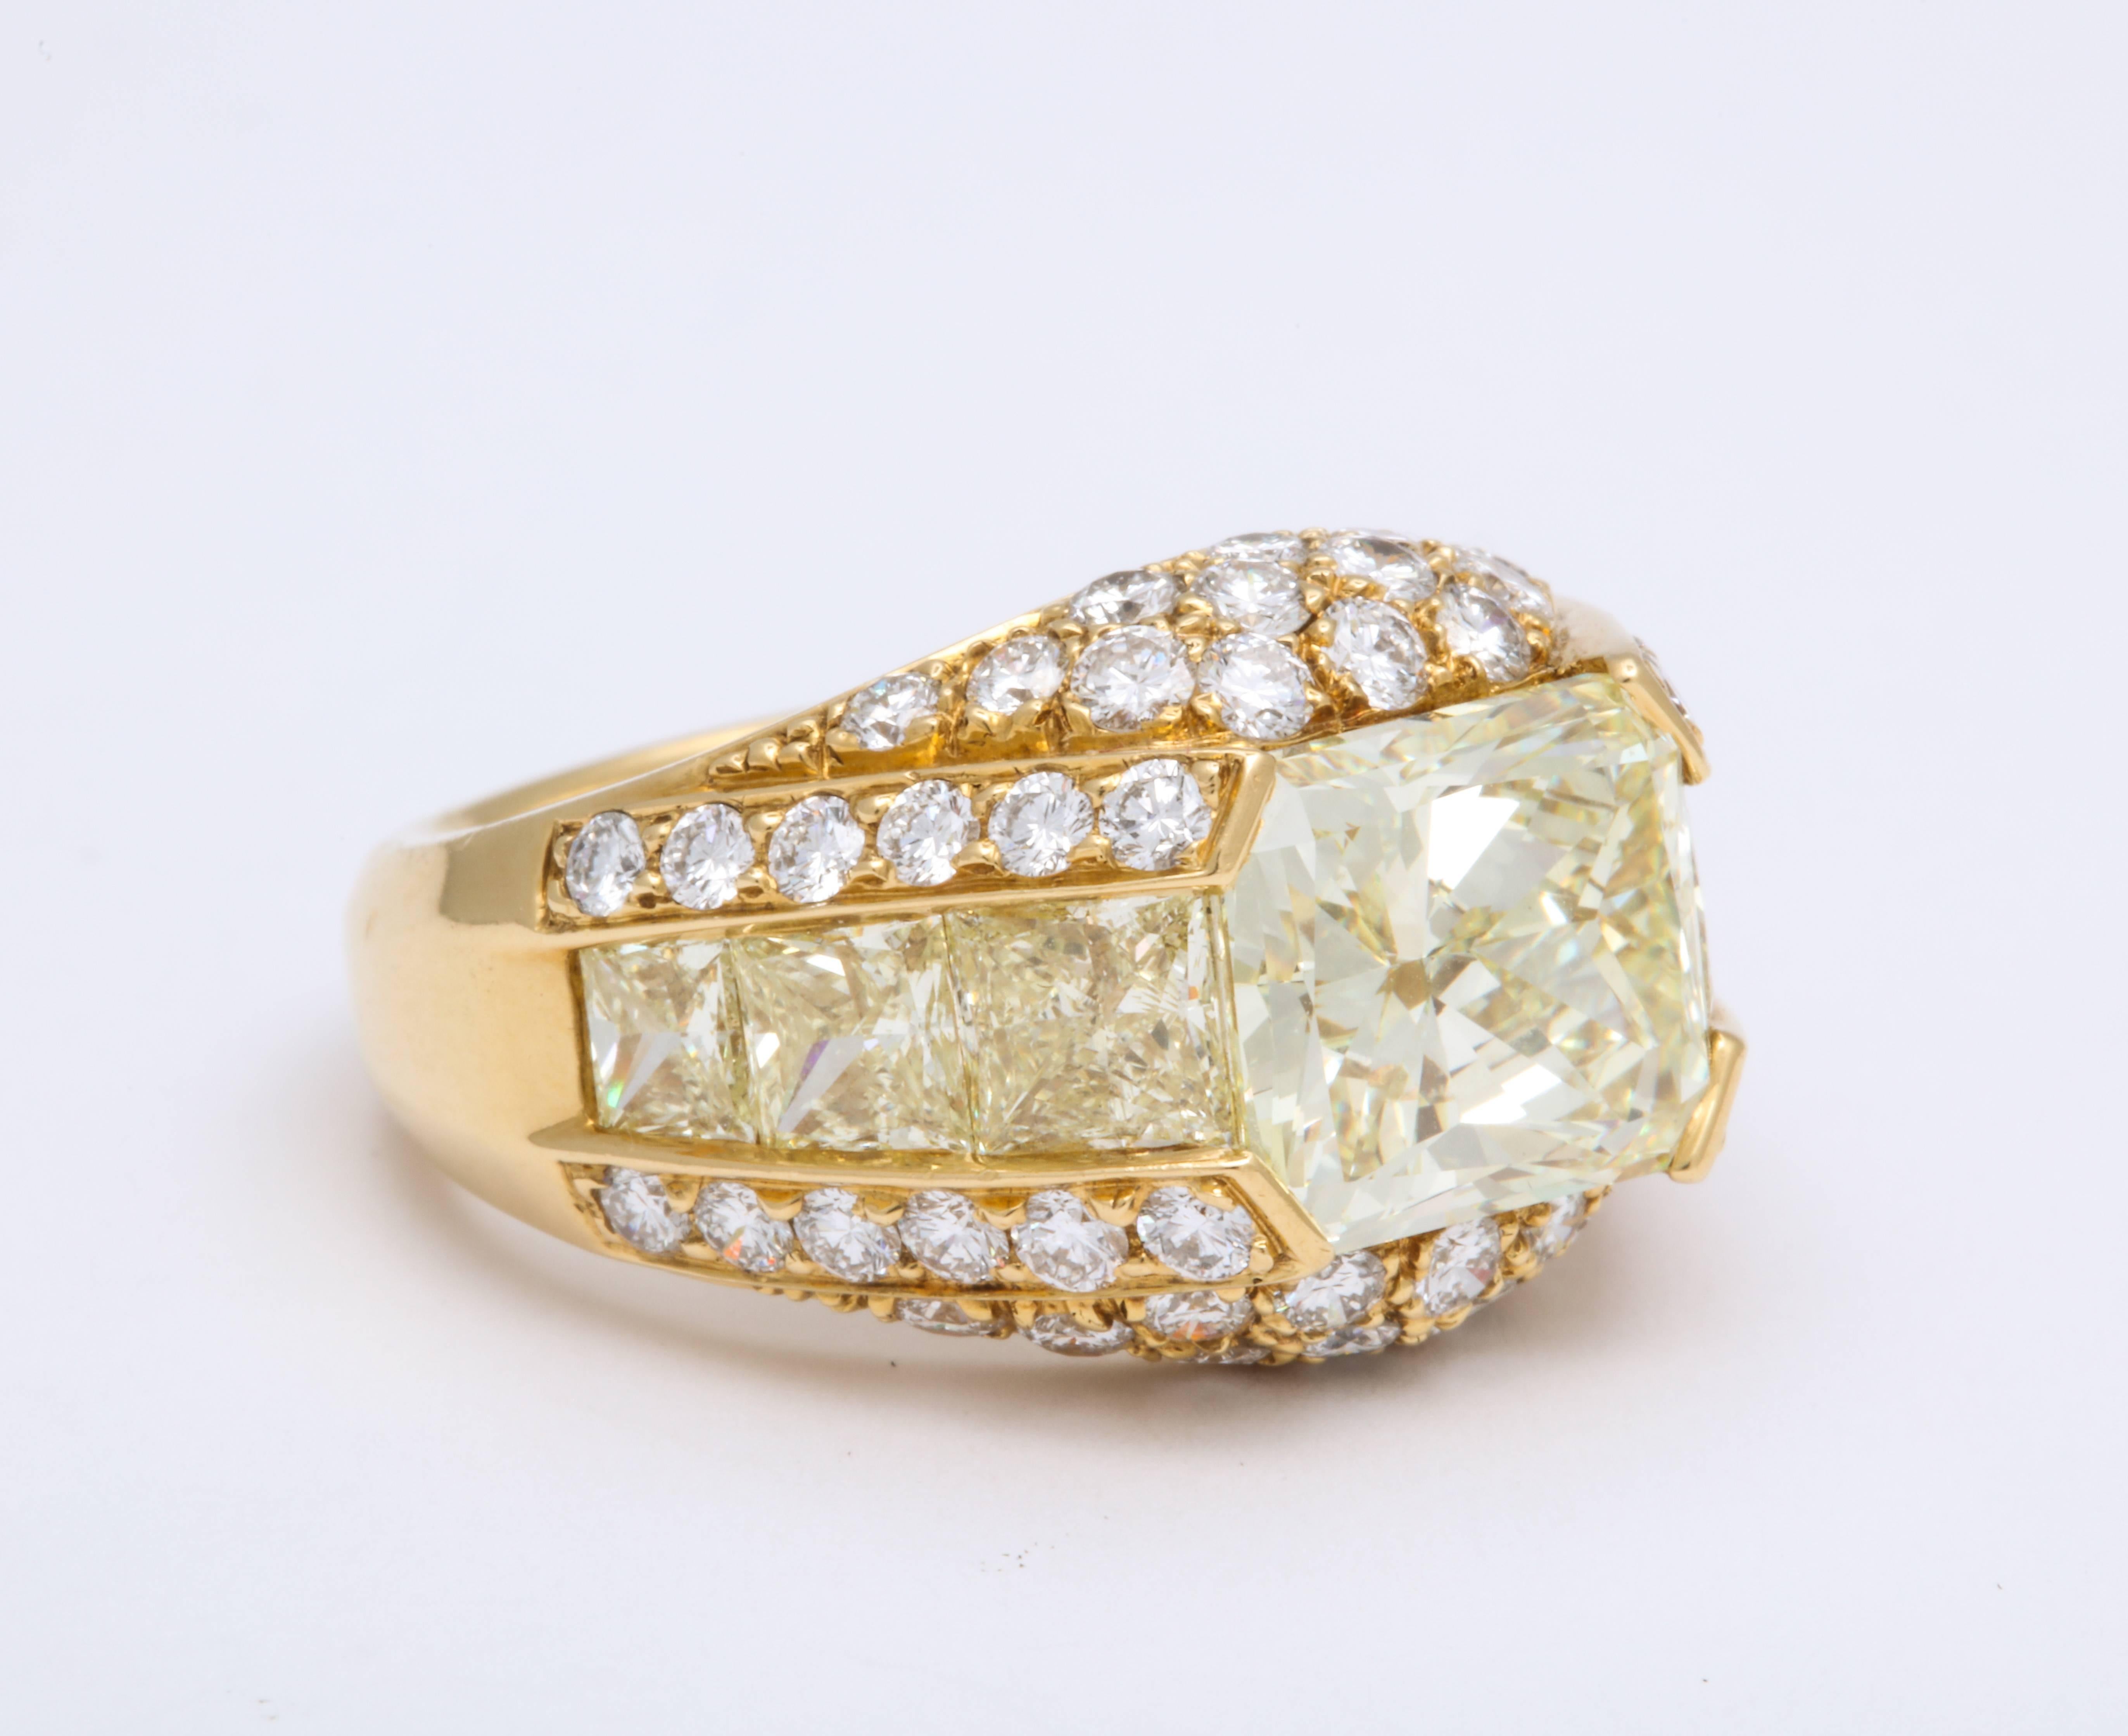 Square shape radiant cut diamond weighing 4.56 carats, natural color X, Y, Z mounted atop contemporary dome ring flanked on an east:west orientation with 6 channel-set, natural fancy yellow princess-cut diamonds weighing 2.39 carats, and finished